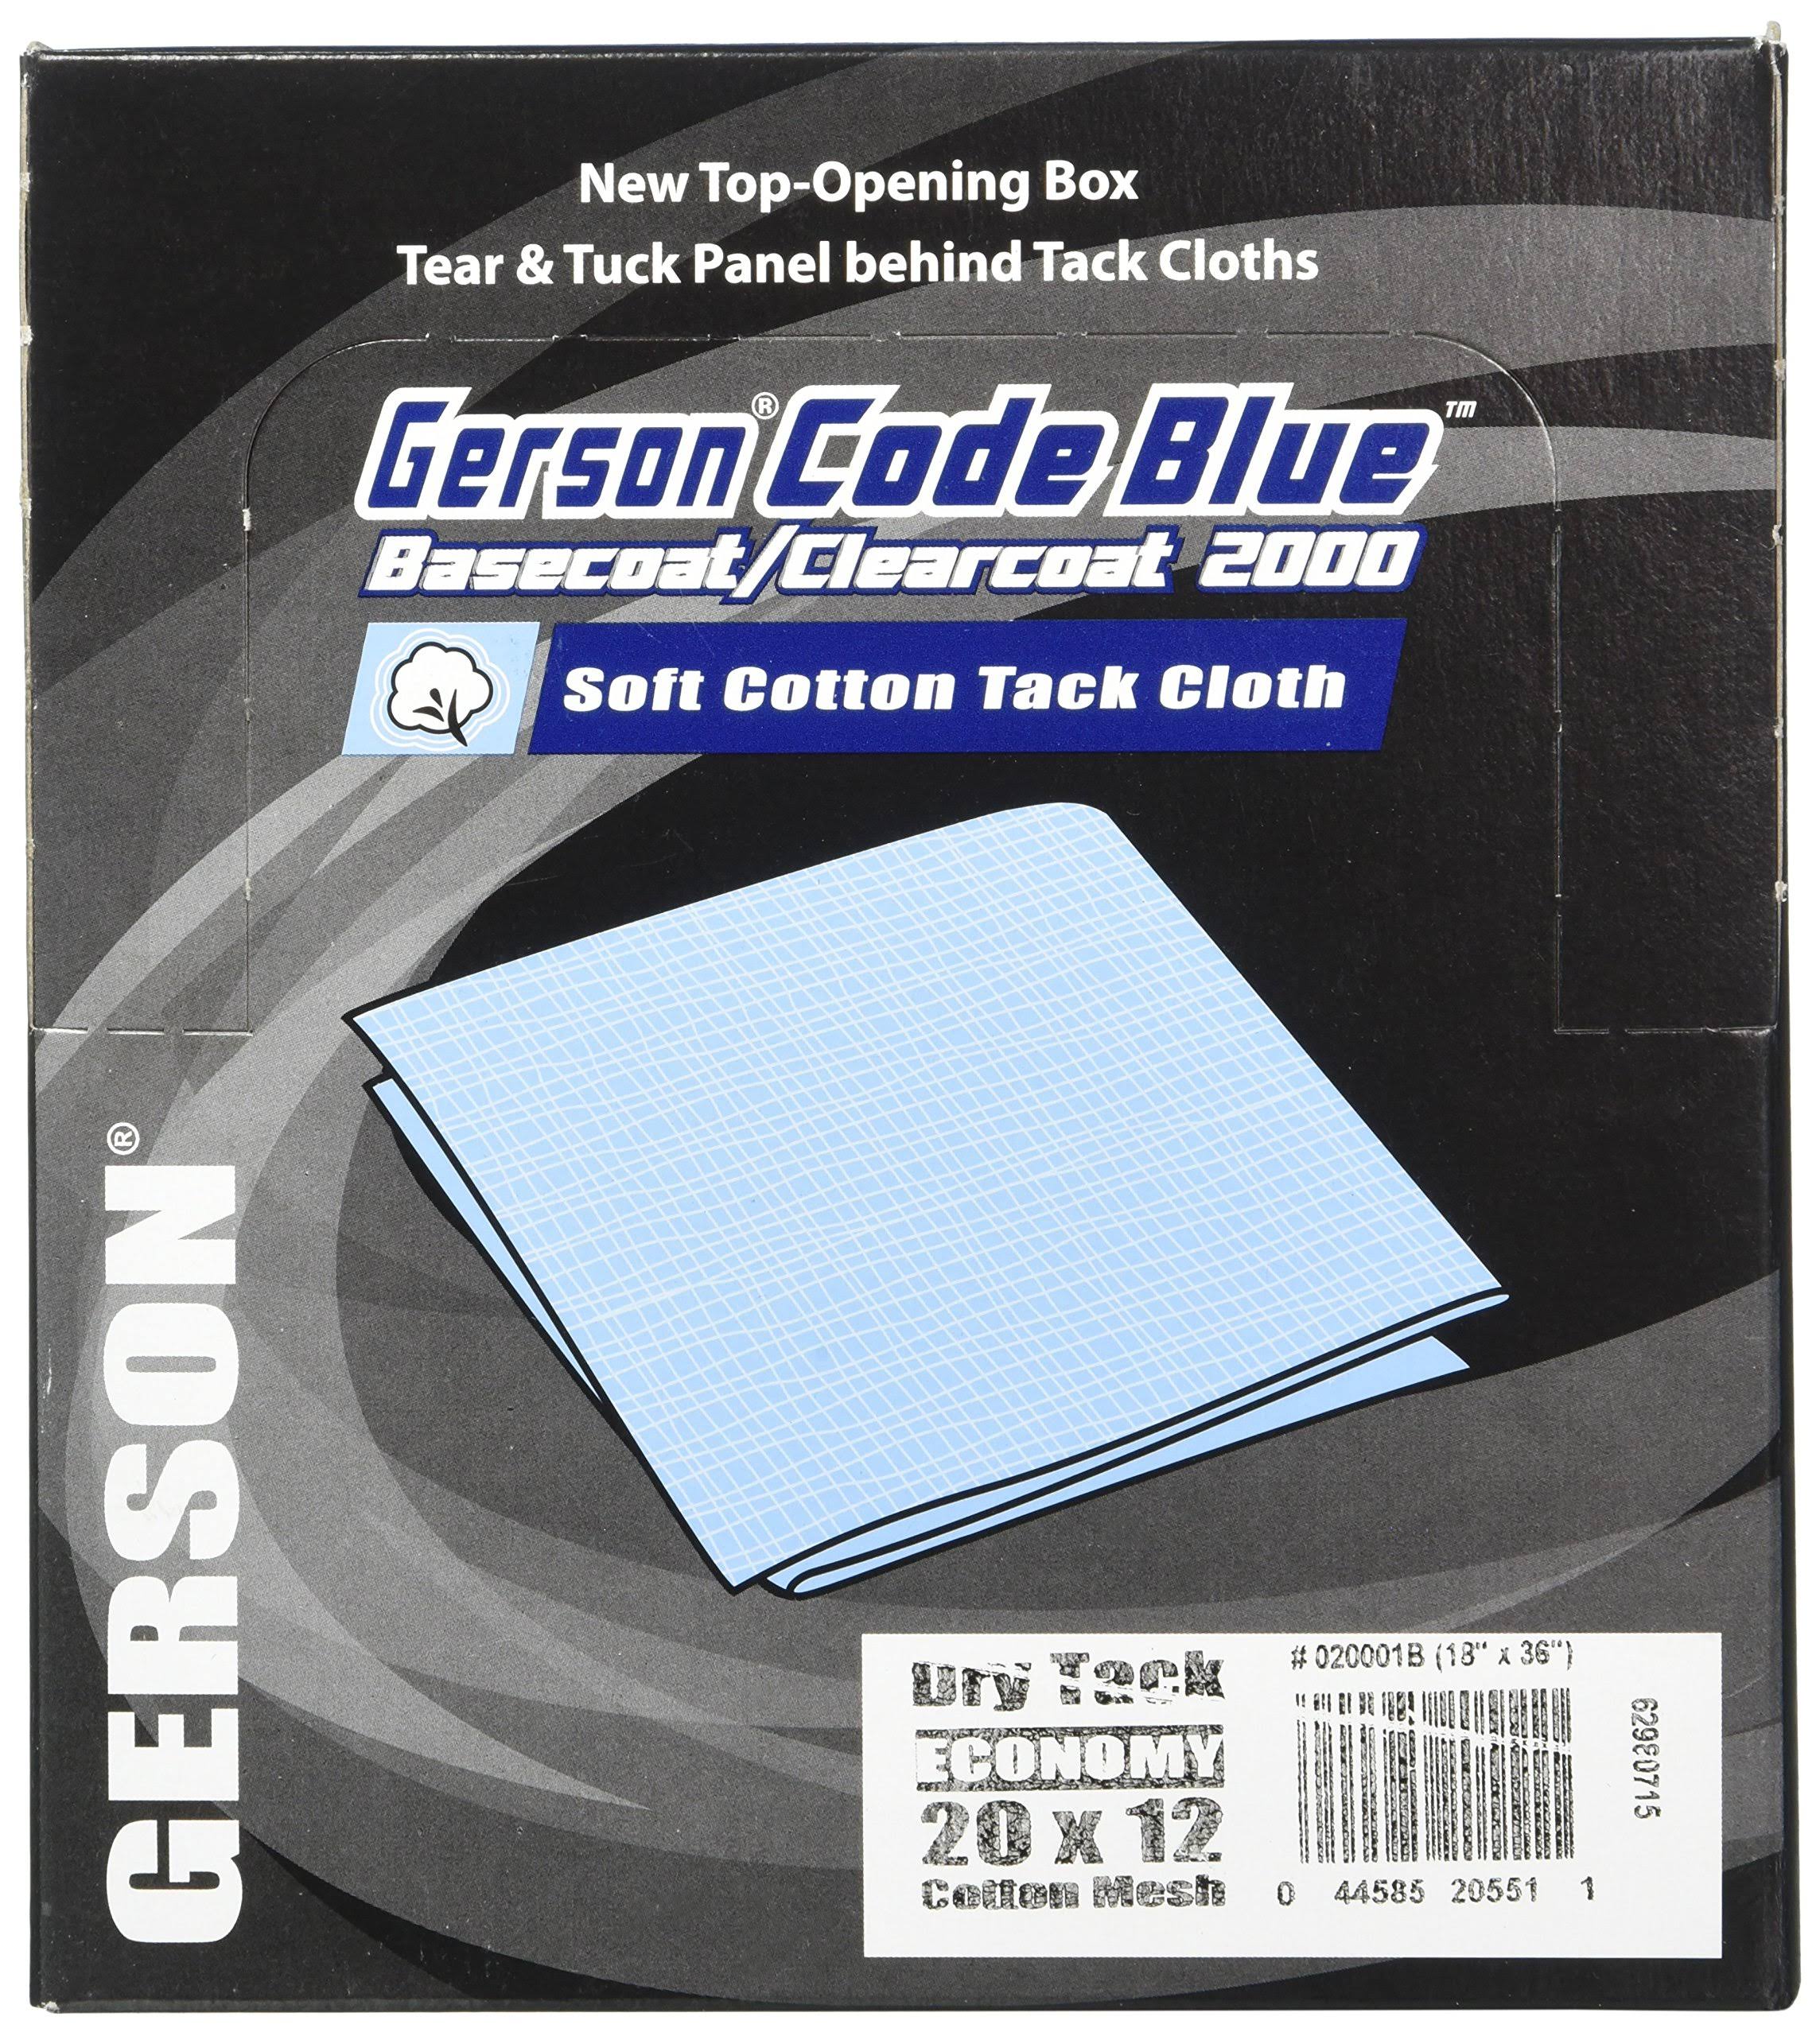 Gerson Basecoat Clearcoat Tack Cloth